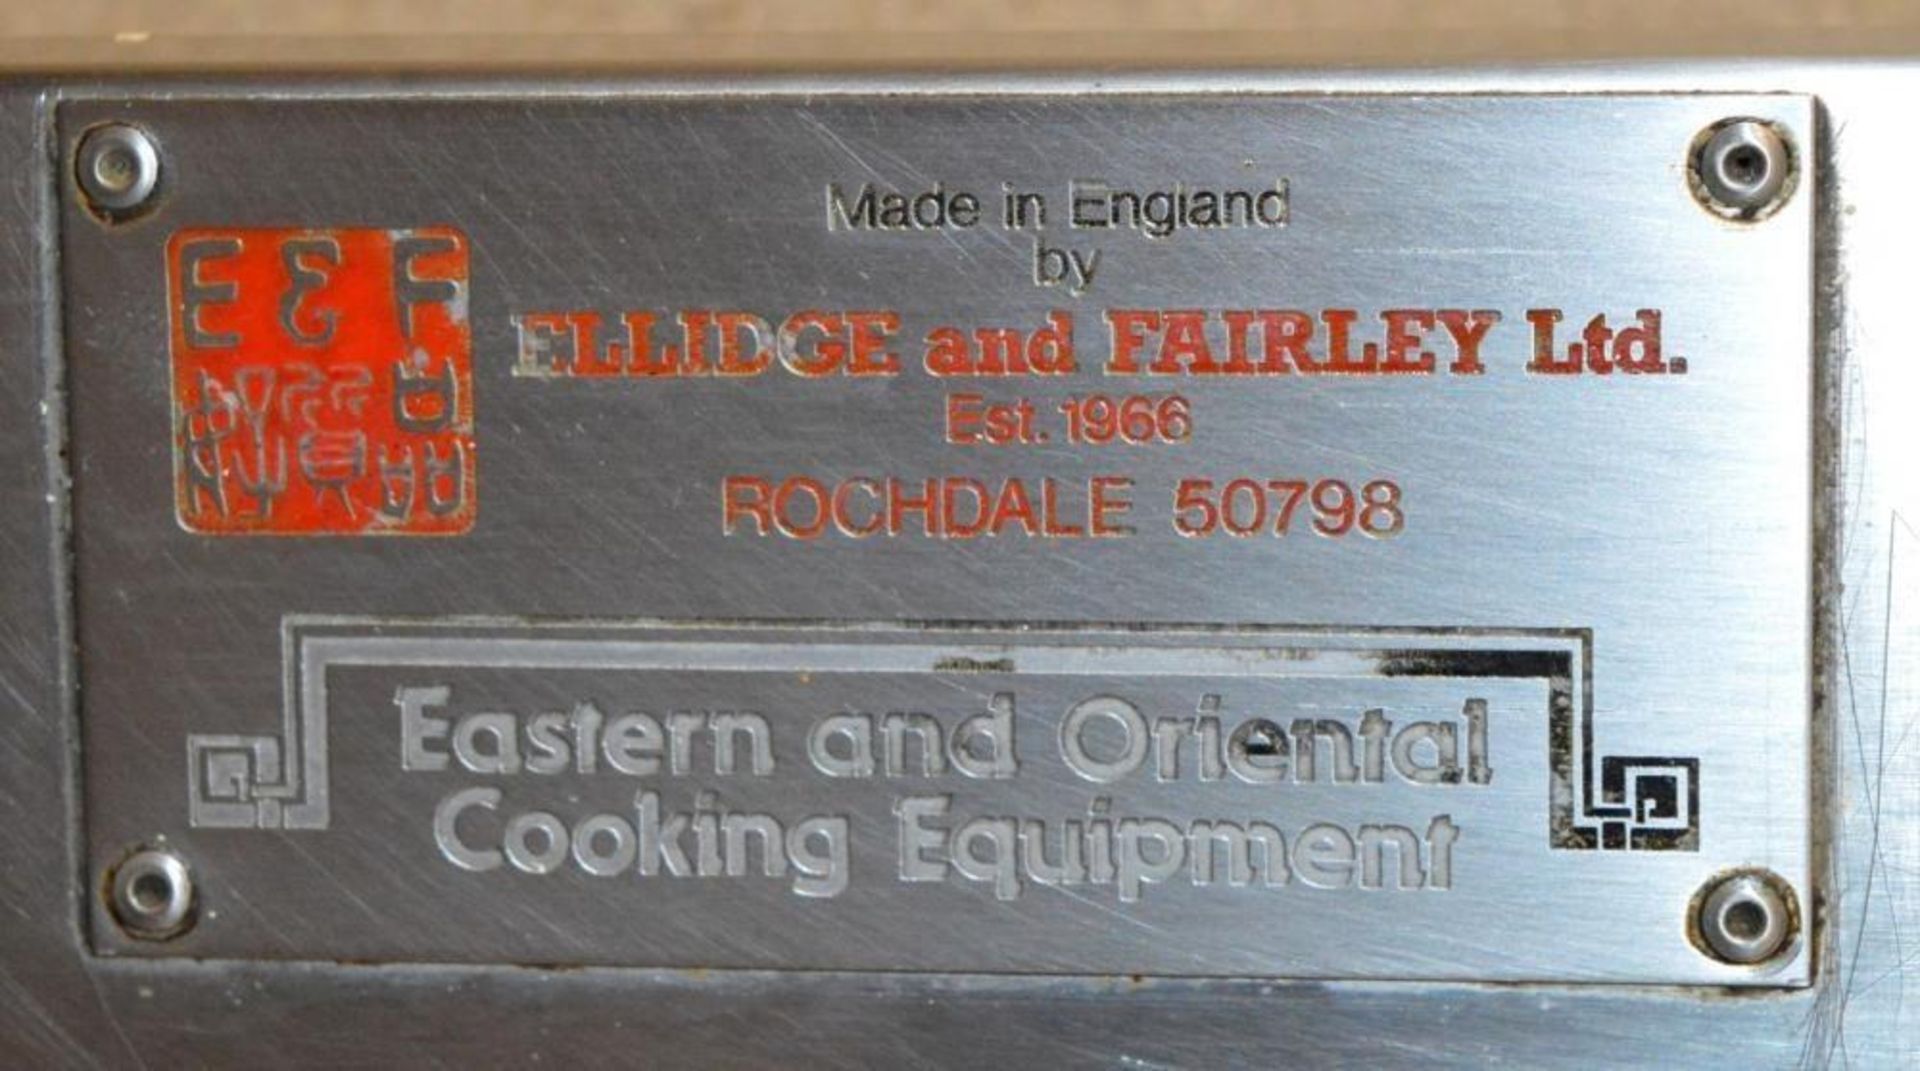 1 x Ellidge and Fairley Eastern & Oriental Food Steamer - Ideal For Chinese Restaurants- Stainless - Image 8 of 9